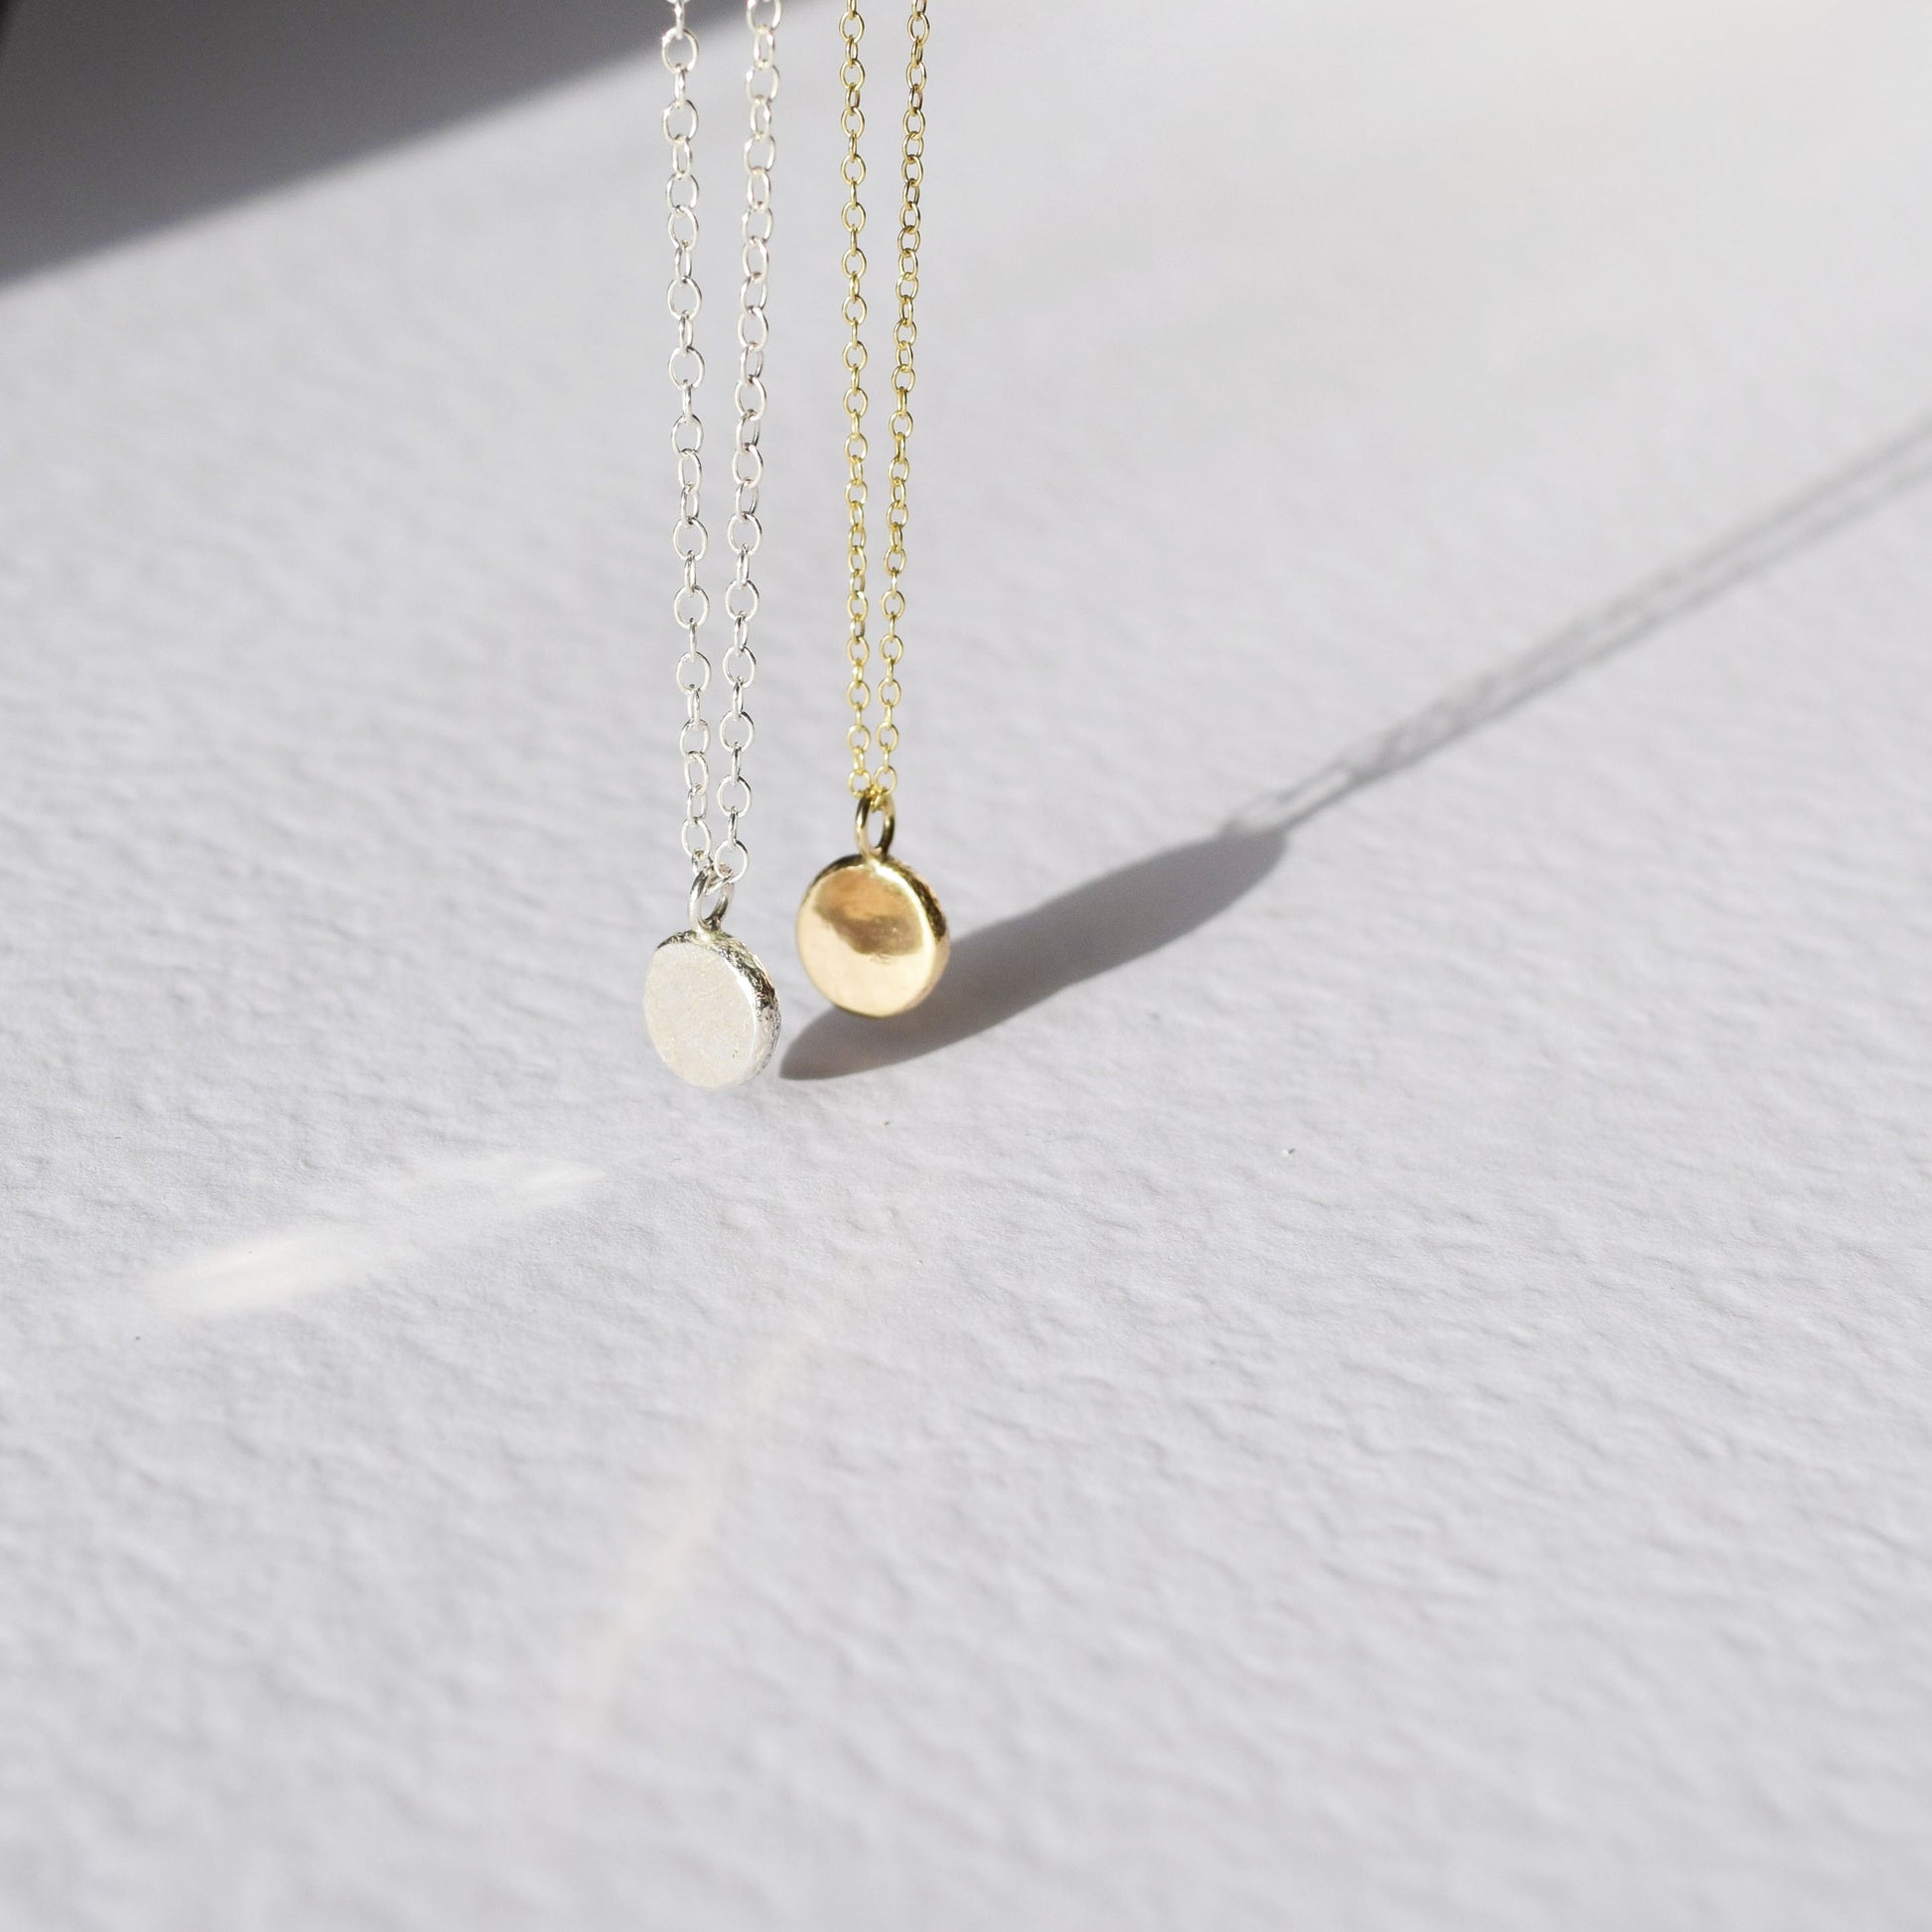 Gold and silver dot necklaces hanging in the sunlight